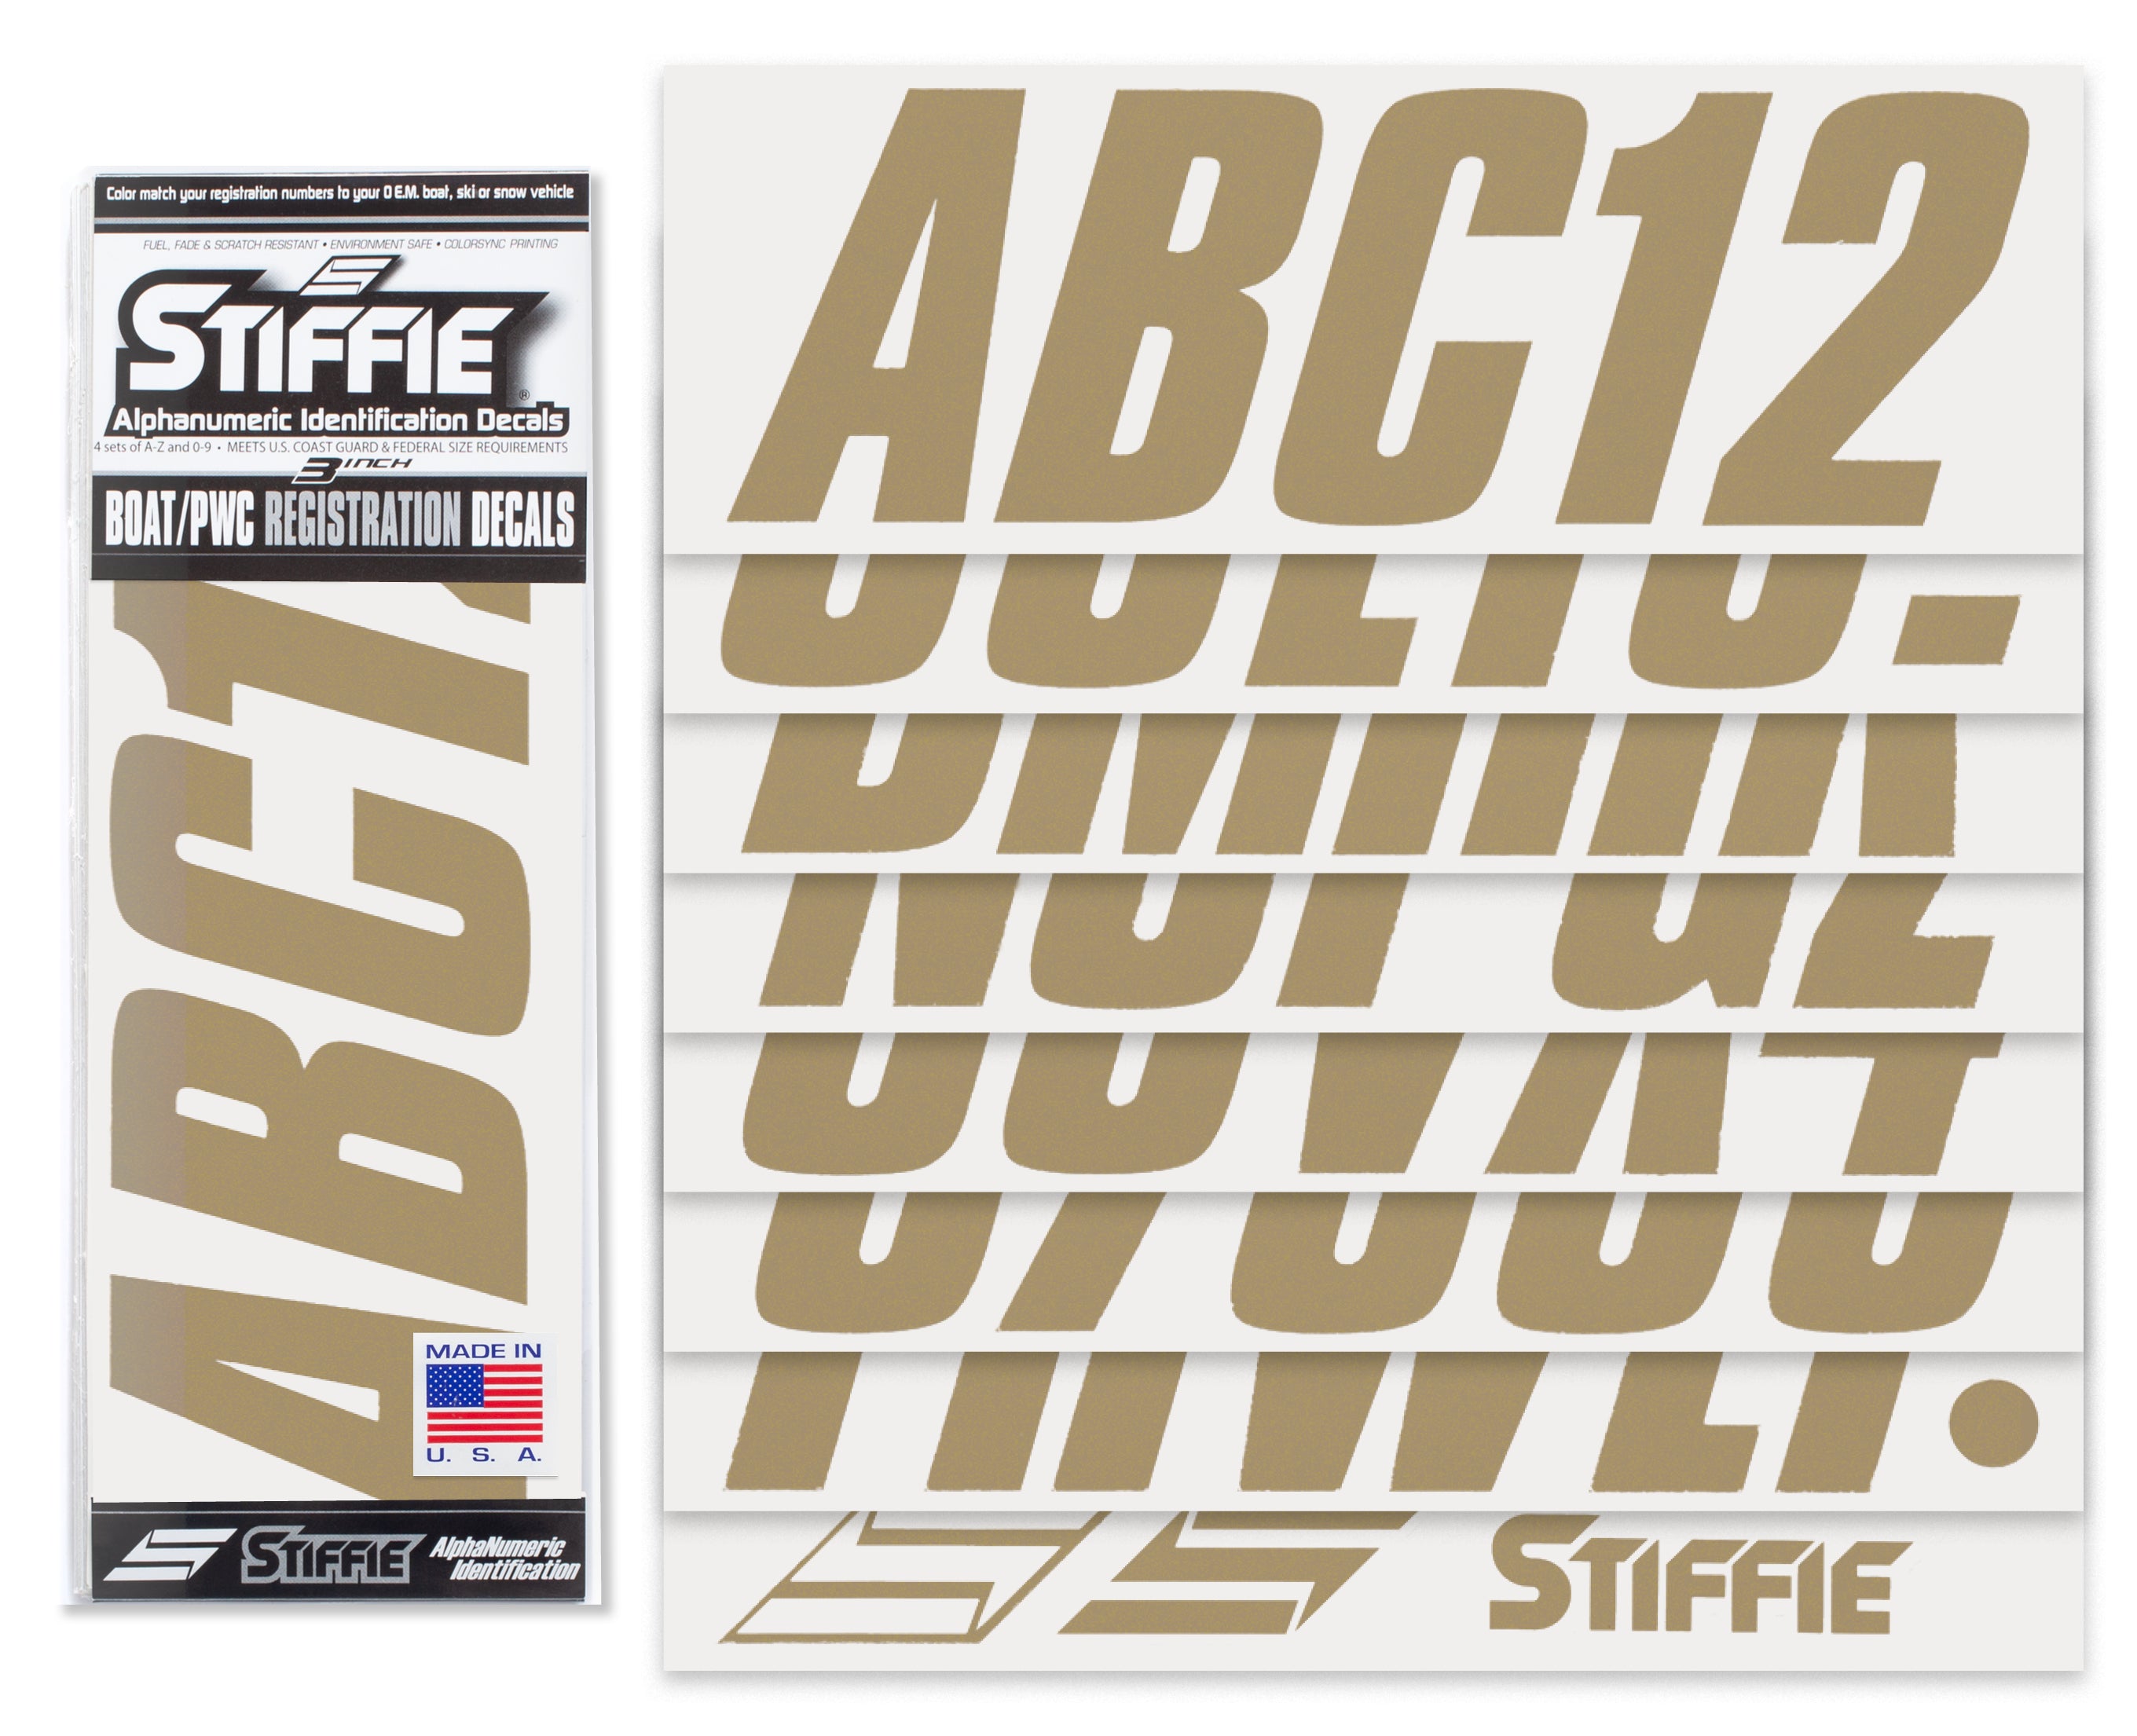 STIFFIE Shift Metallic Gold 3" ID Kit Alpha-Numeric Registration Identification Numbers Stickers Decals for Boats & Personal Watercraft